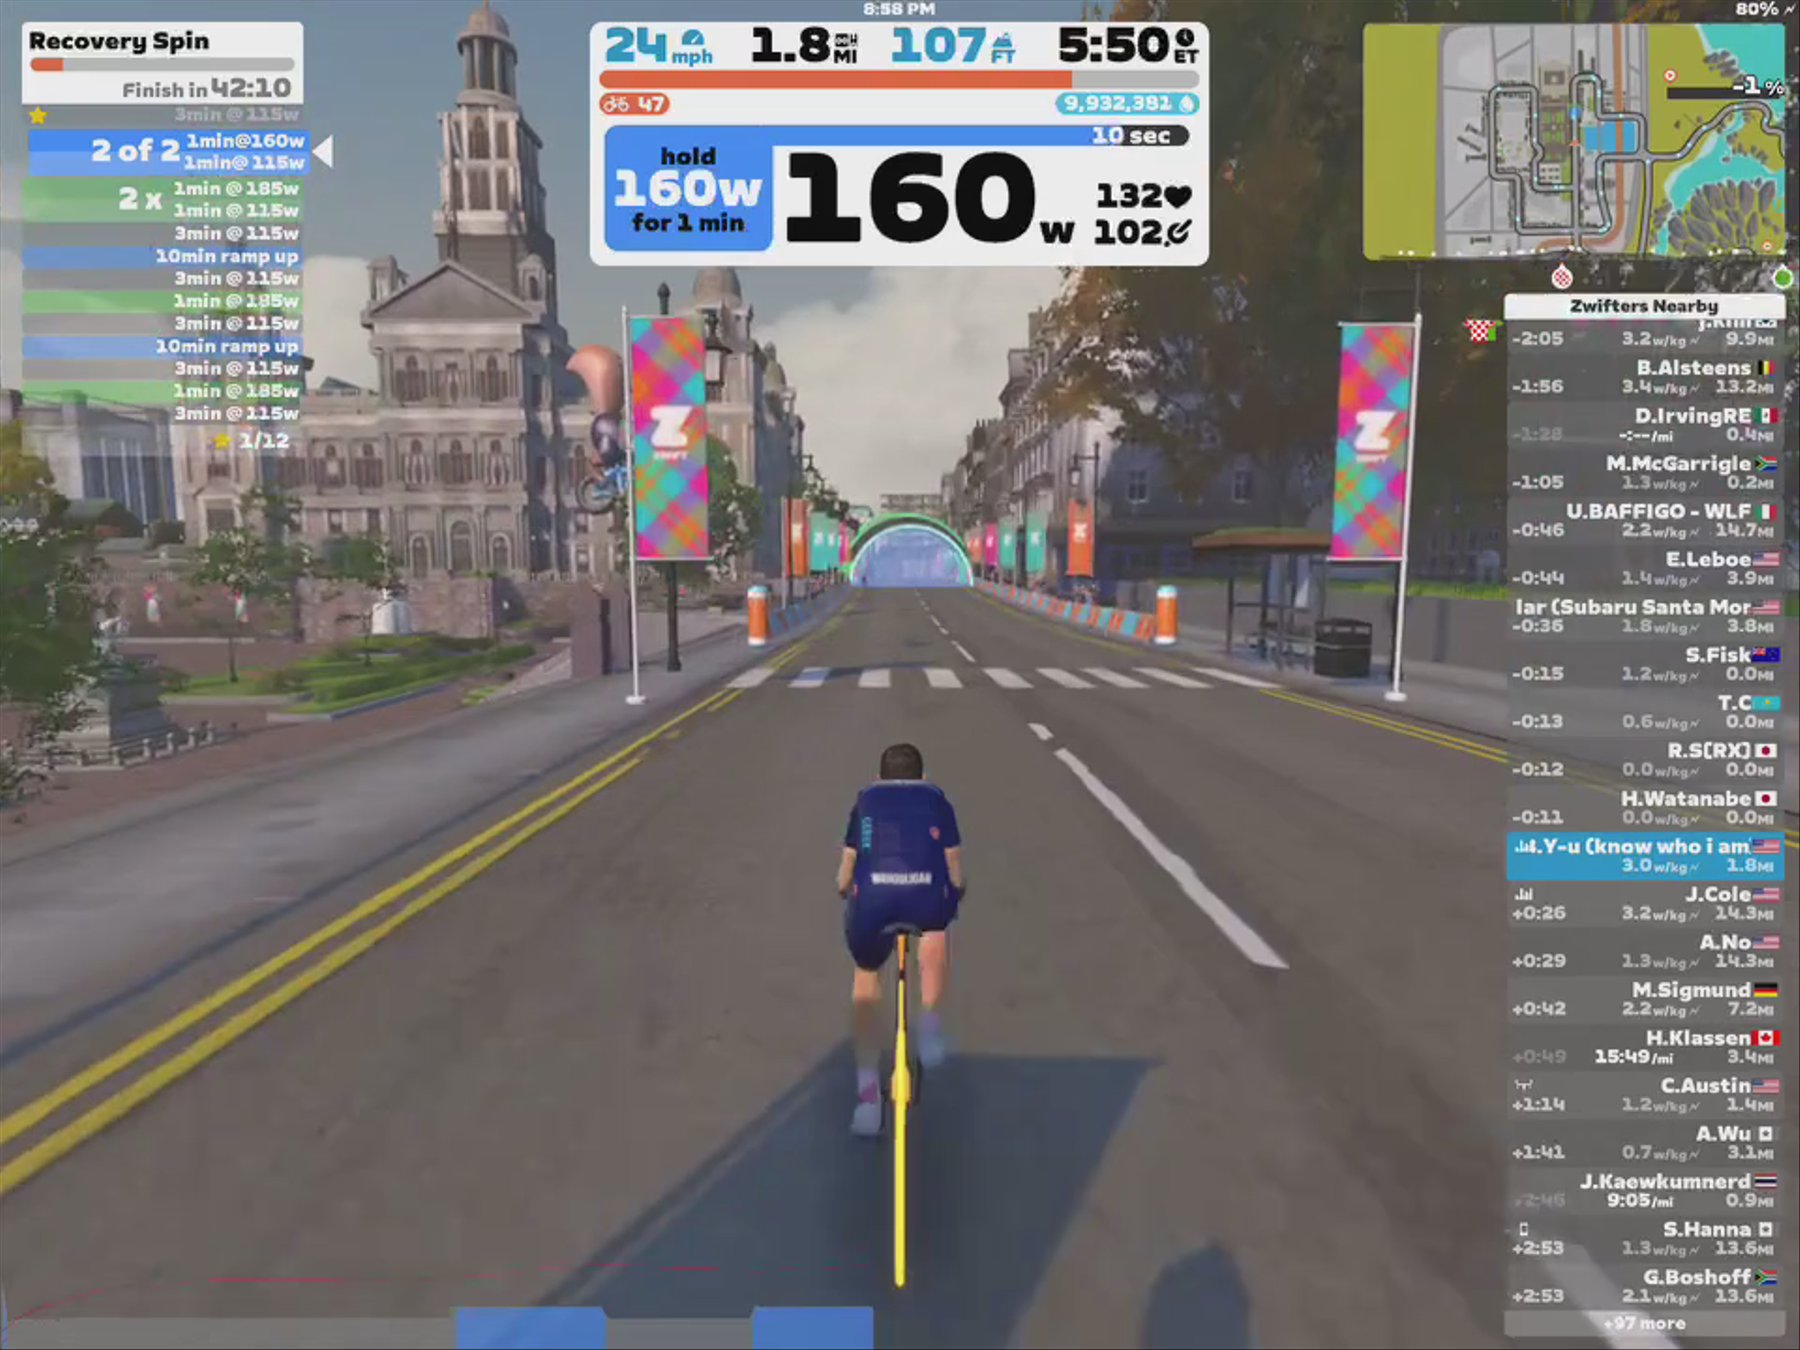 Zwift - Recovery Spin in Scotland